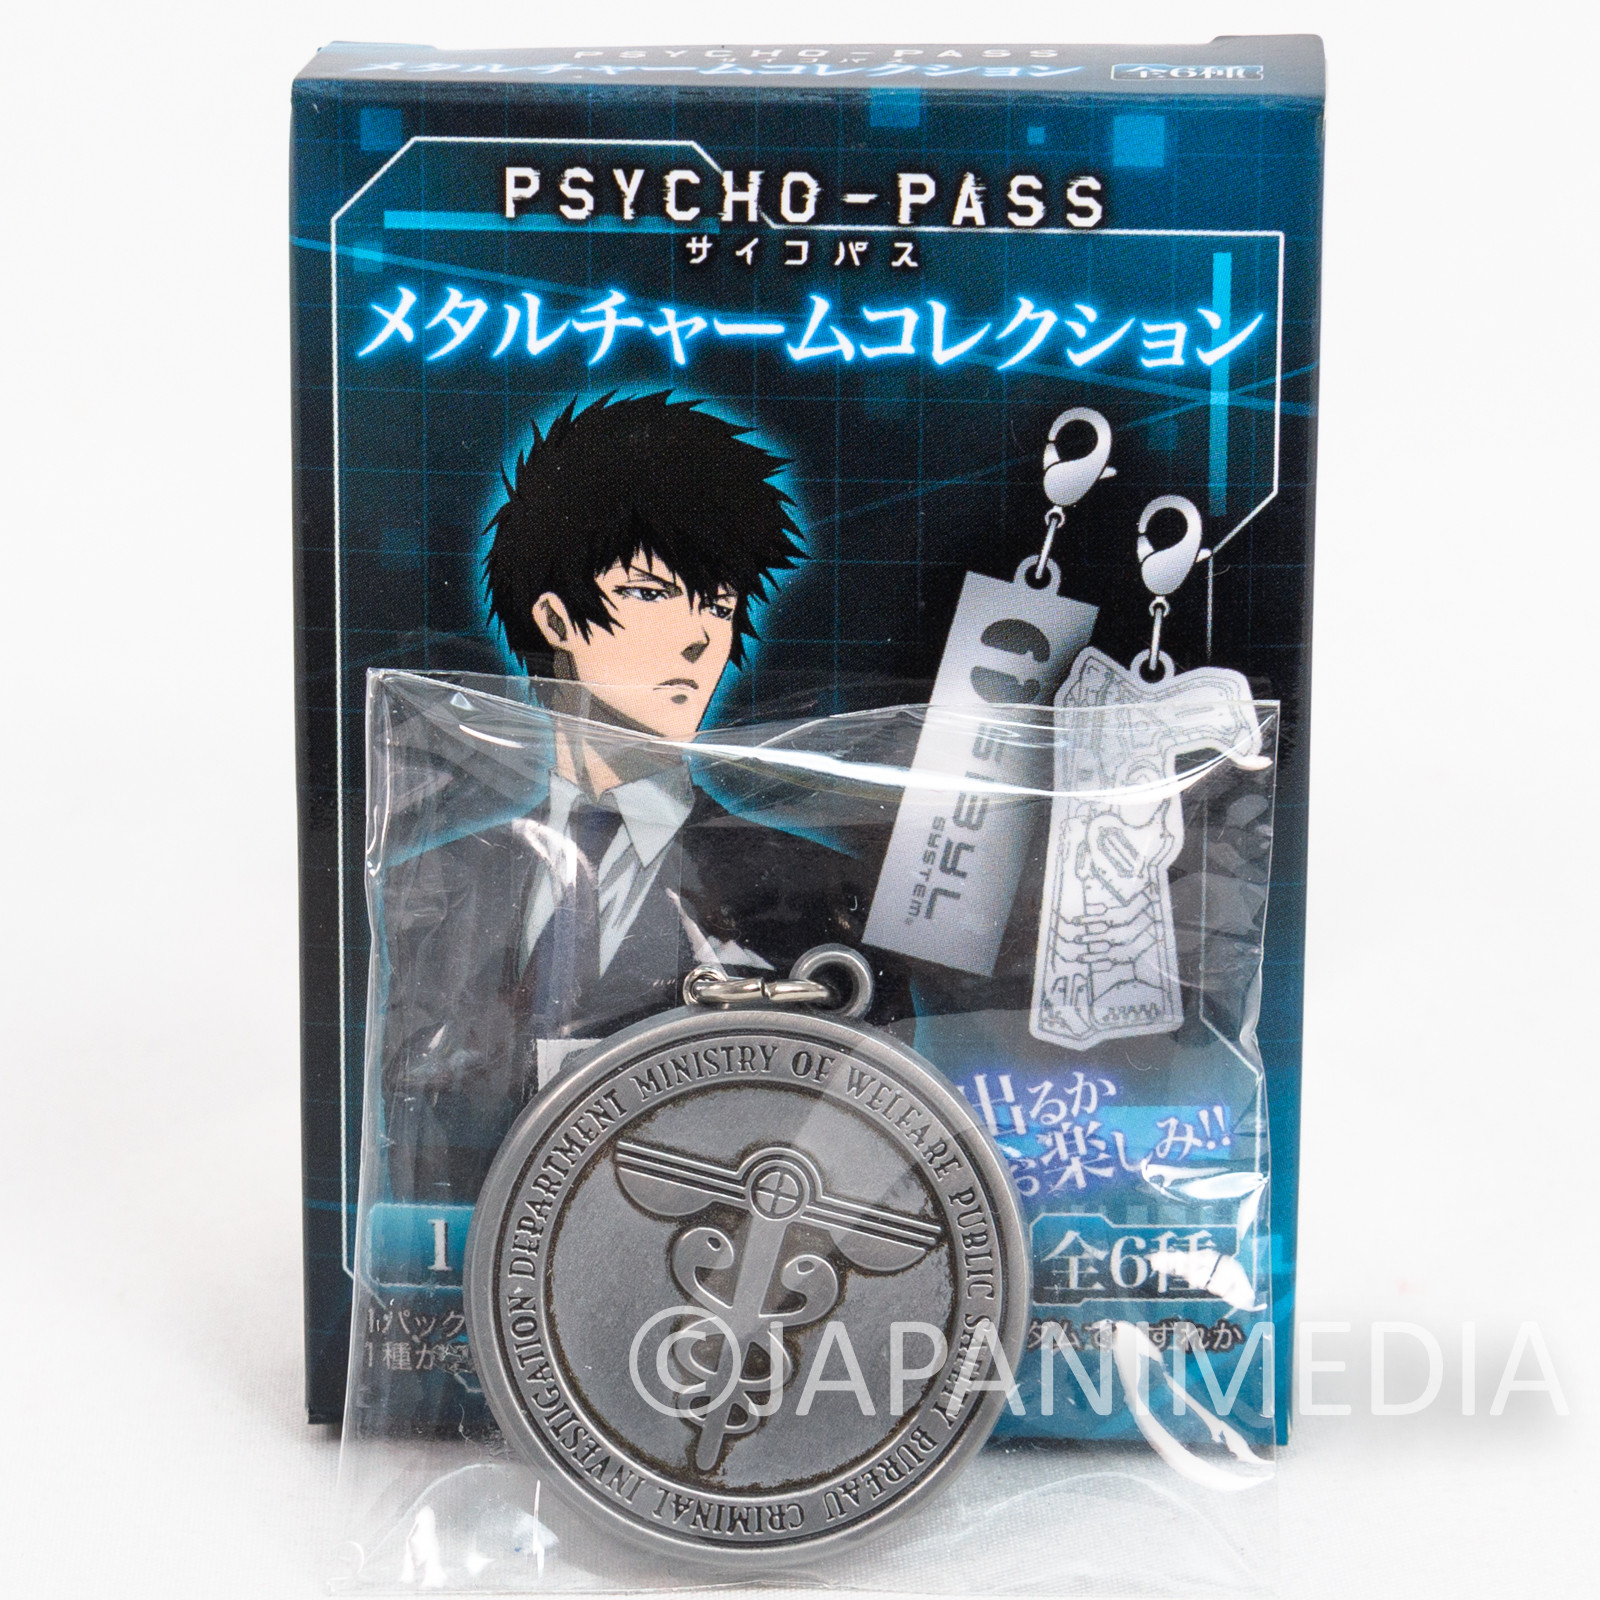 Psycho-Pass Public Safety Metal Charm Collection Movic JAPAN ANIME